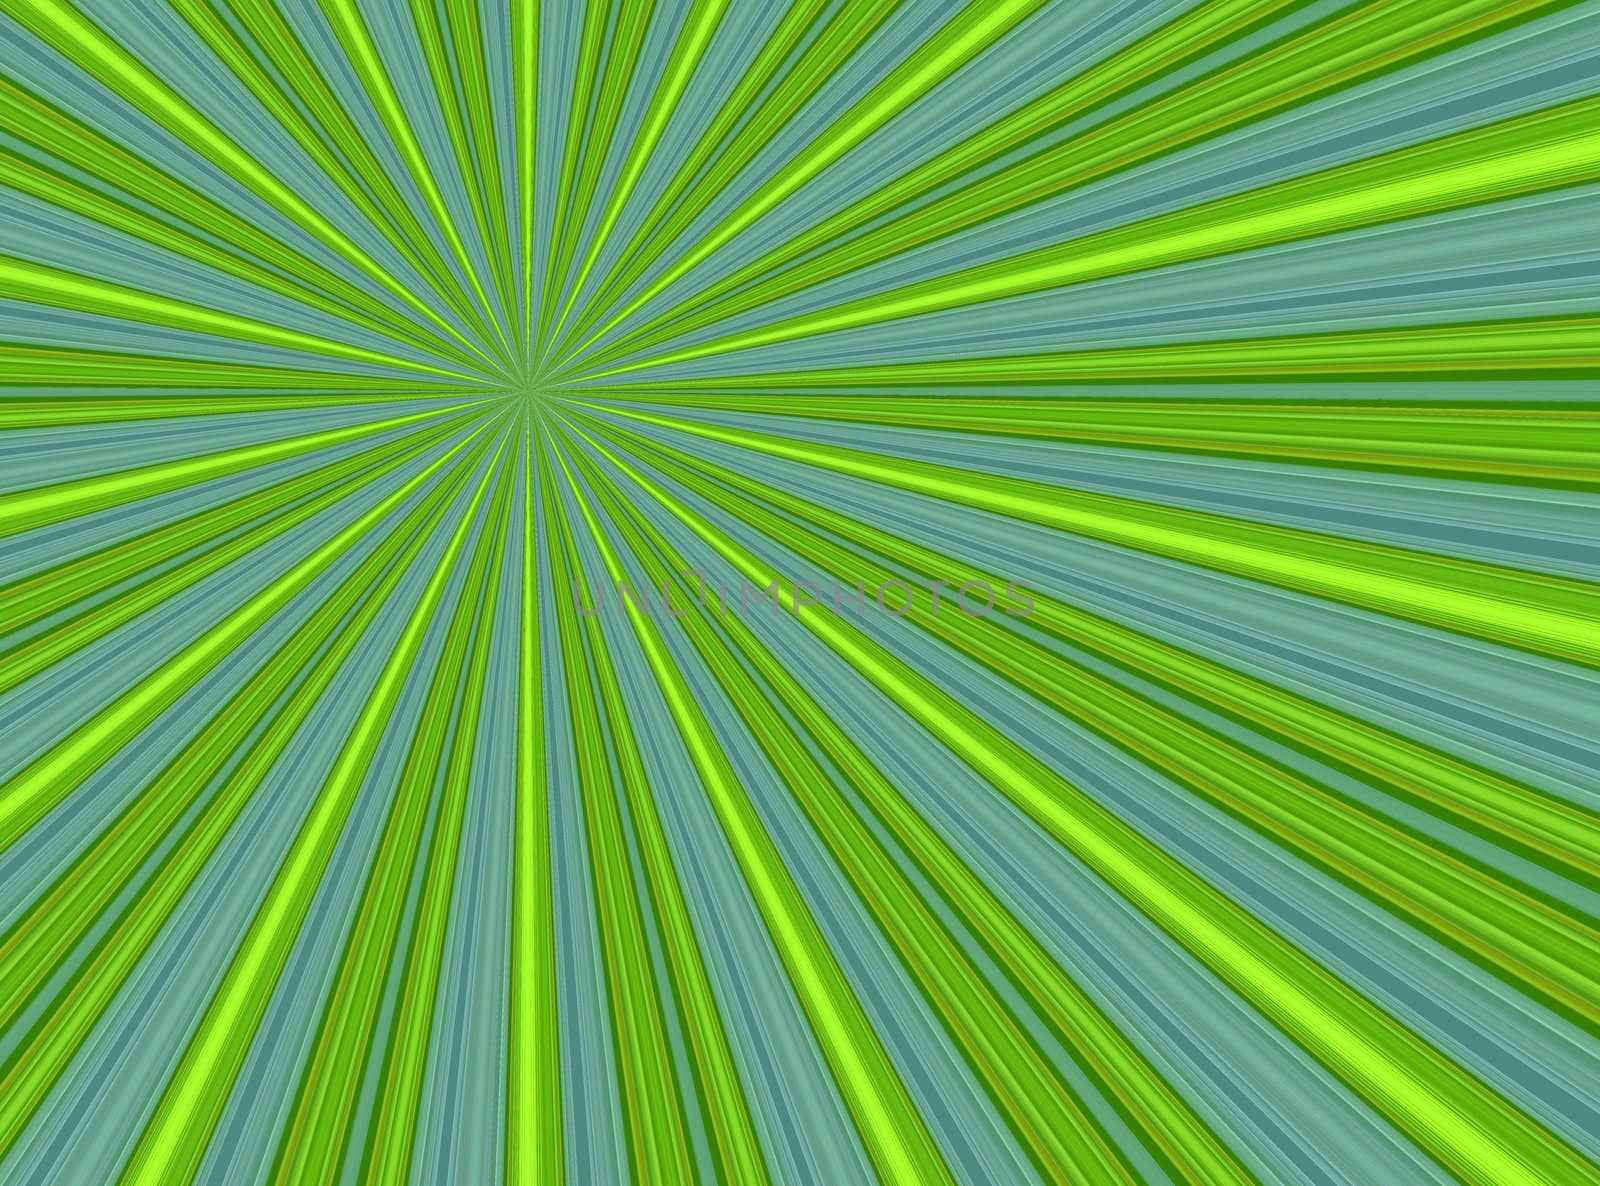 design of emerging rays with green background with fine texture